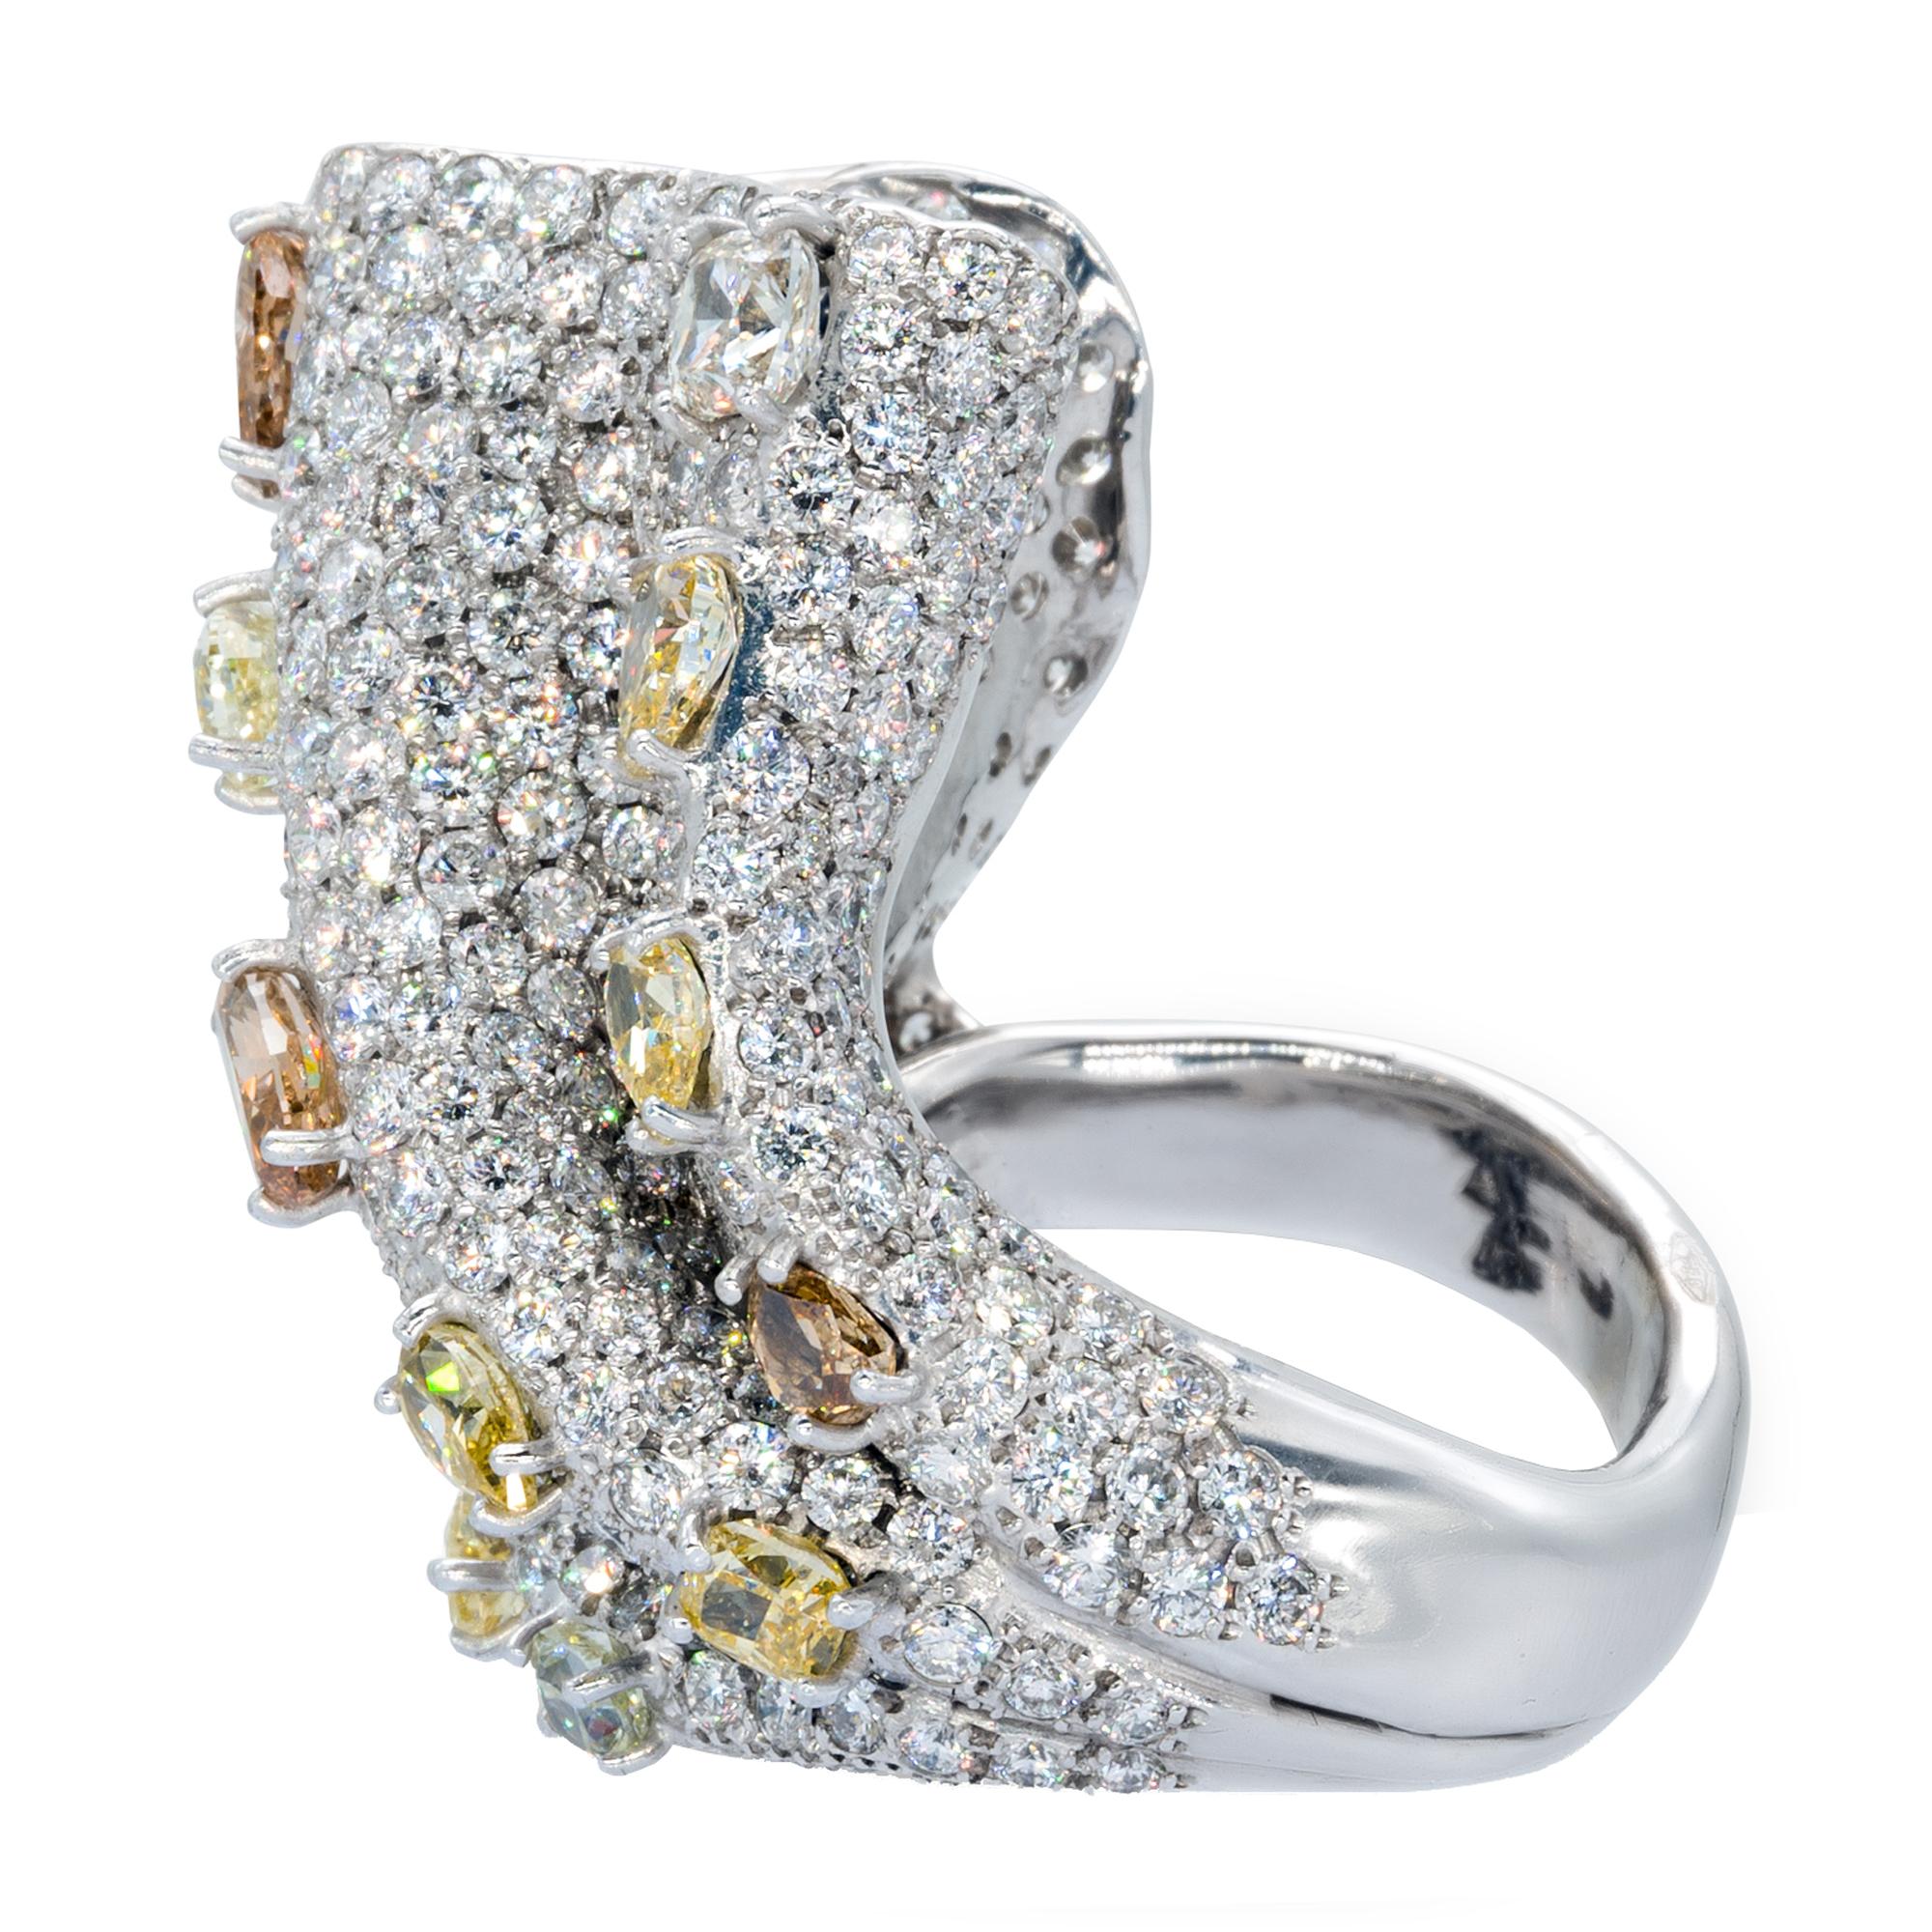 White and Natural Fancy Diamonds d'Avossa Ring For Sale 9